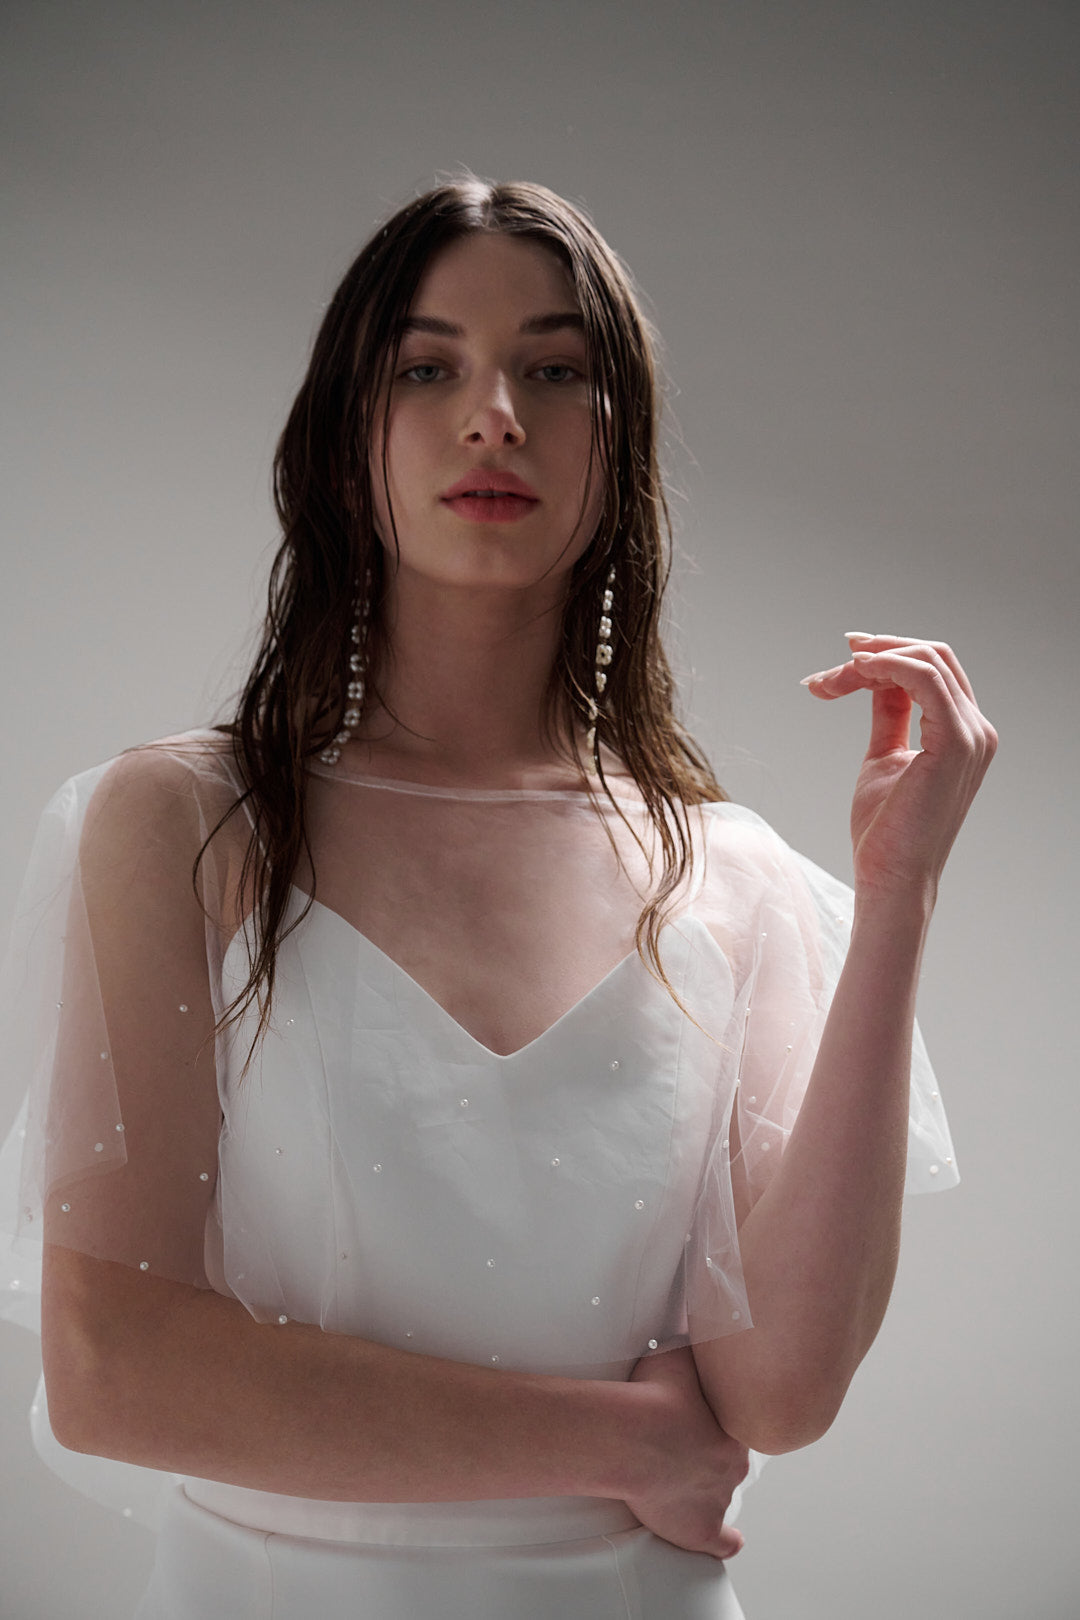 Iris Cape - a sheer and refined pearl cape that brings an elegant flair to any wedding day look, without upstaging the dress. Featuring tiny glistening pearls, this cape is a perfect accessory for a minimal but impactful statement